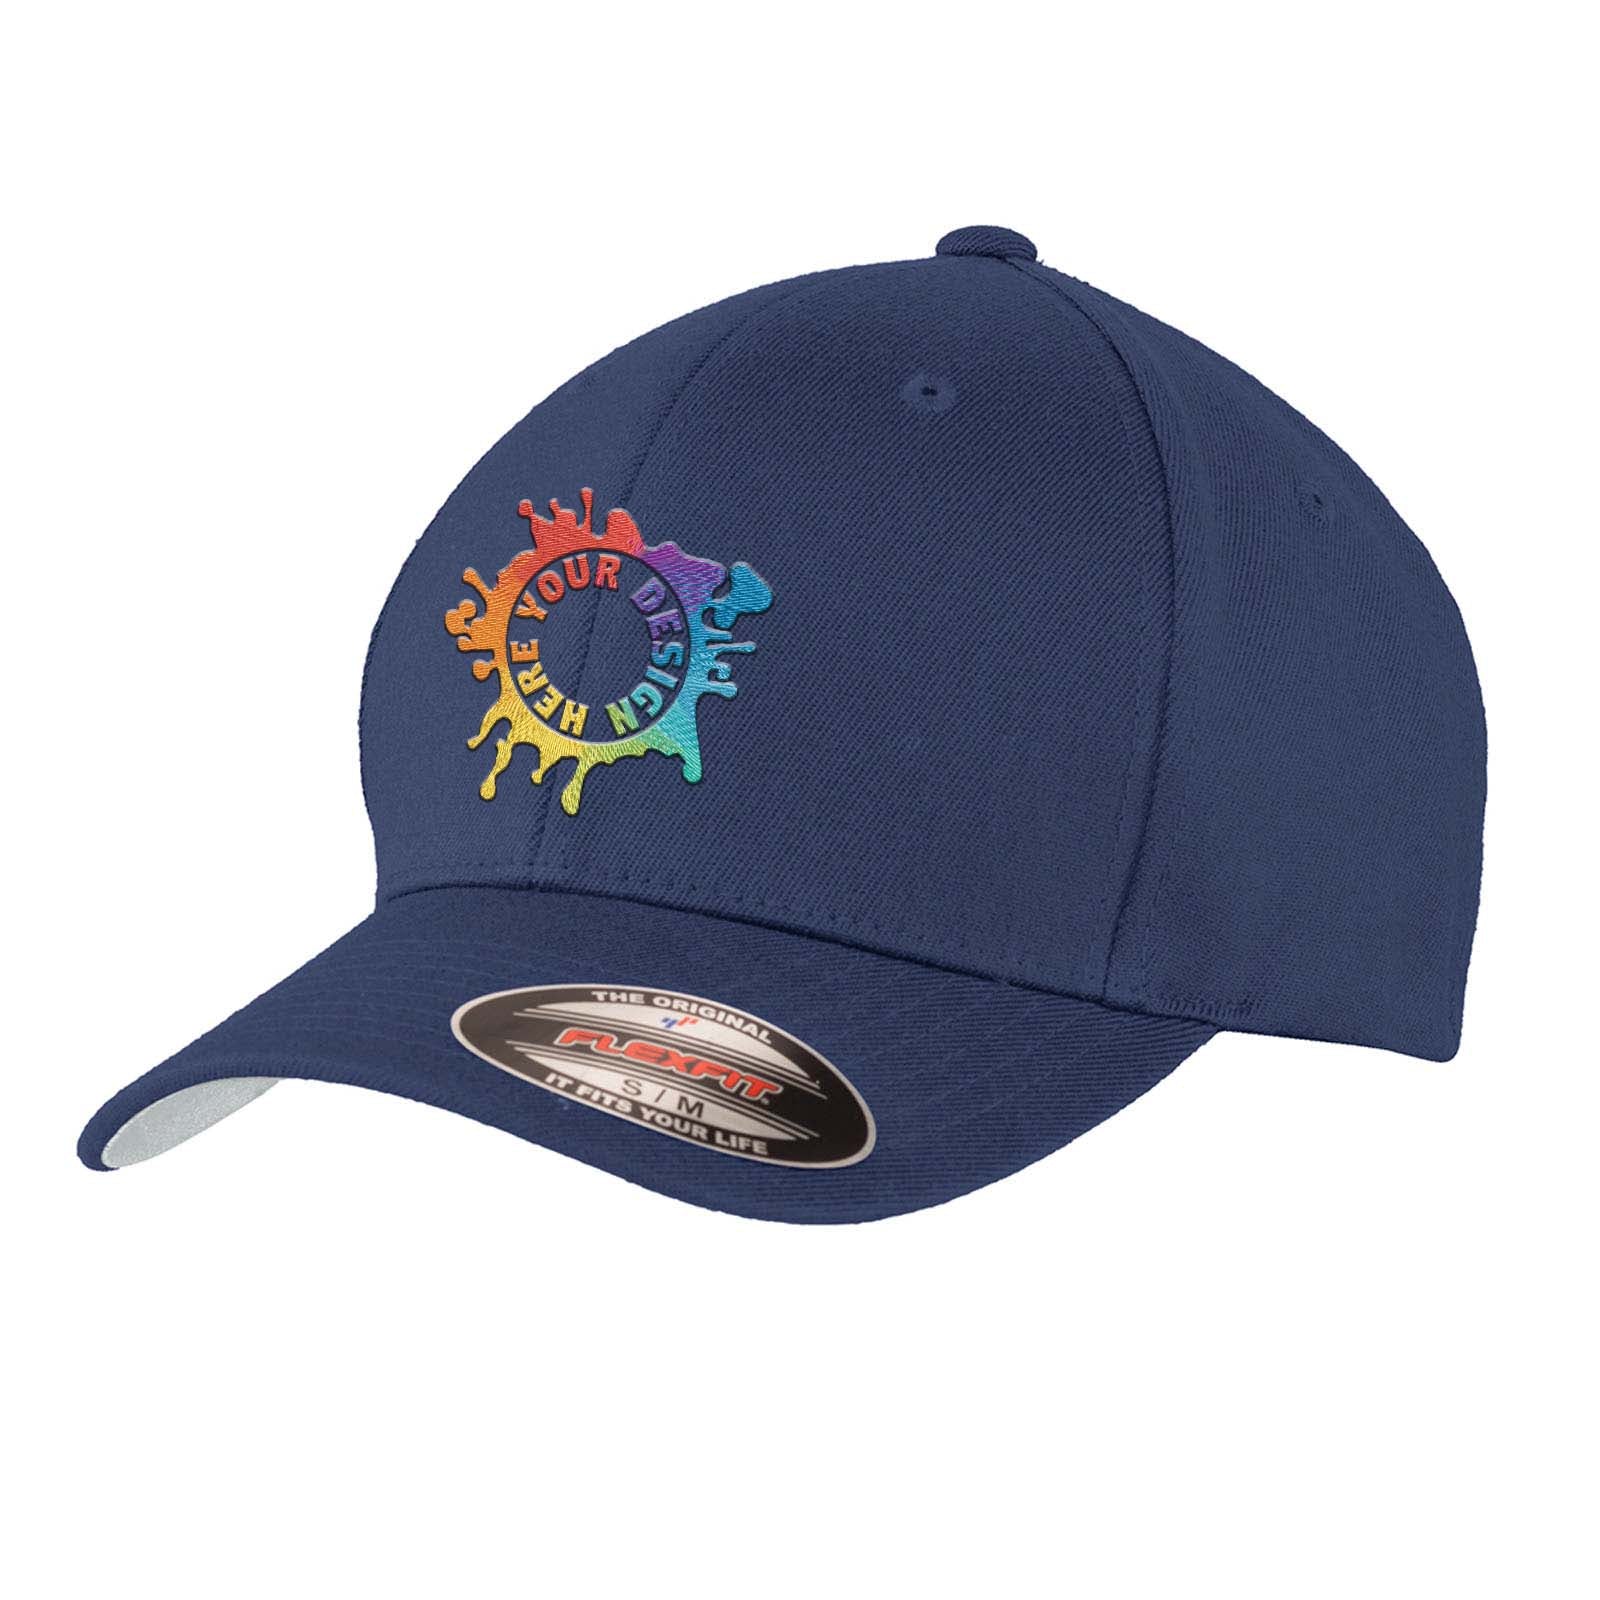 Embroidered Port Authority® Flexfit® Wool Blend Cap - Mato & Hash